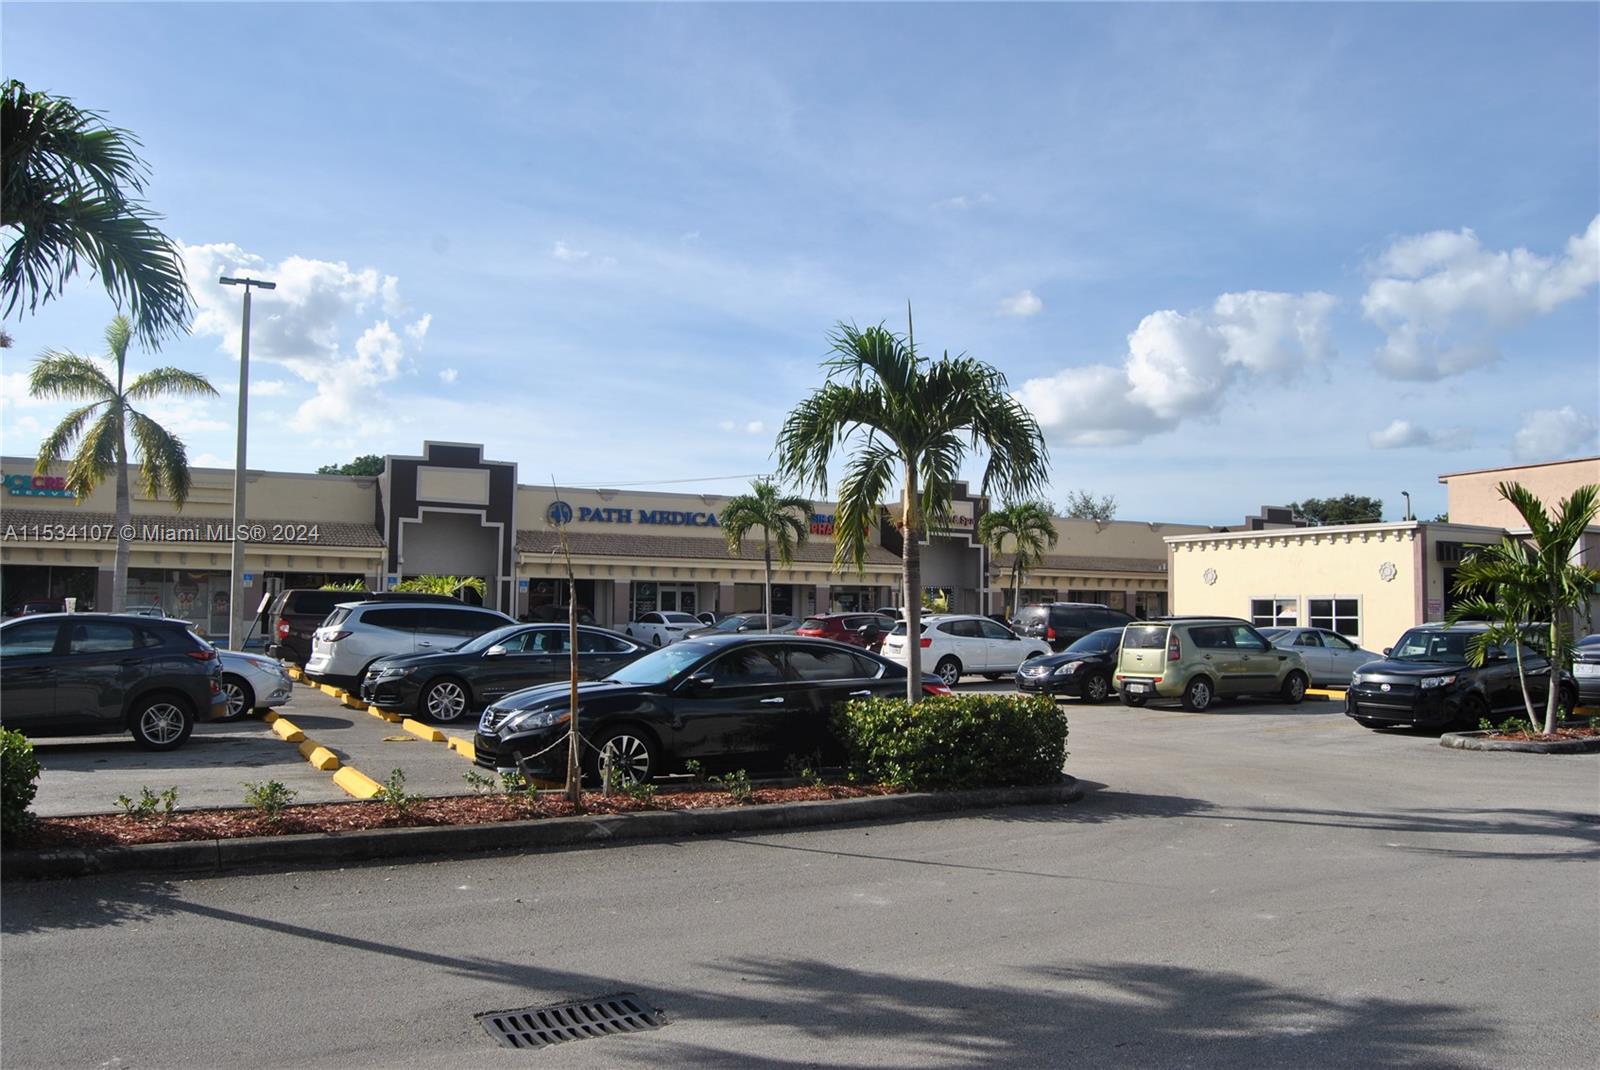 Photo of 17560 NW 27 Ave #122 in Miami Gardens, FL